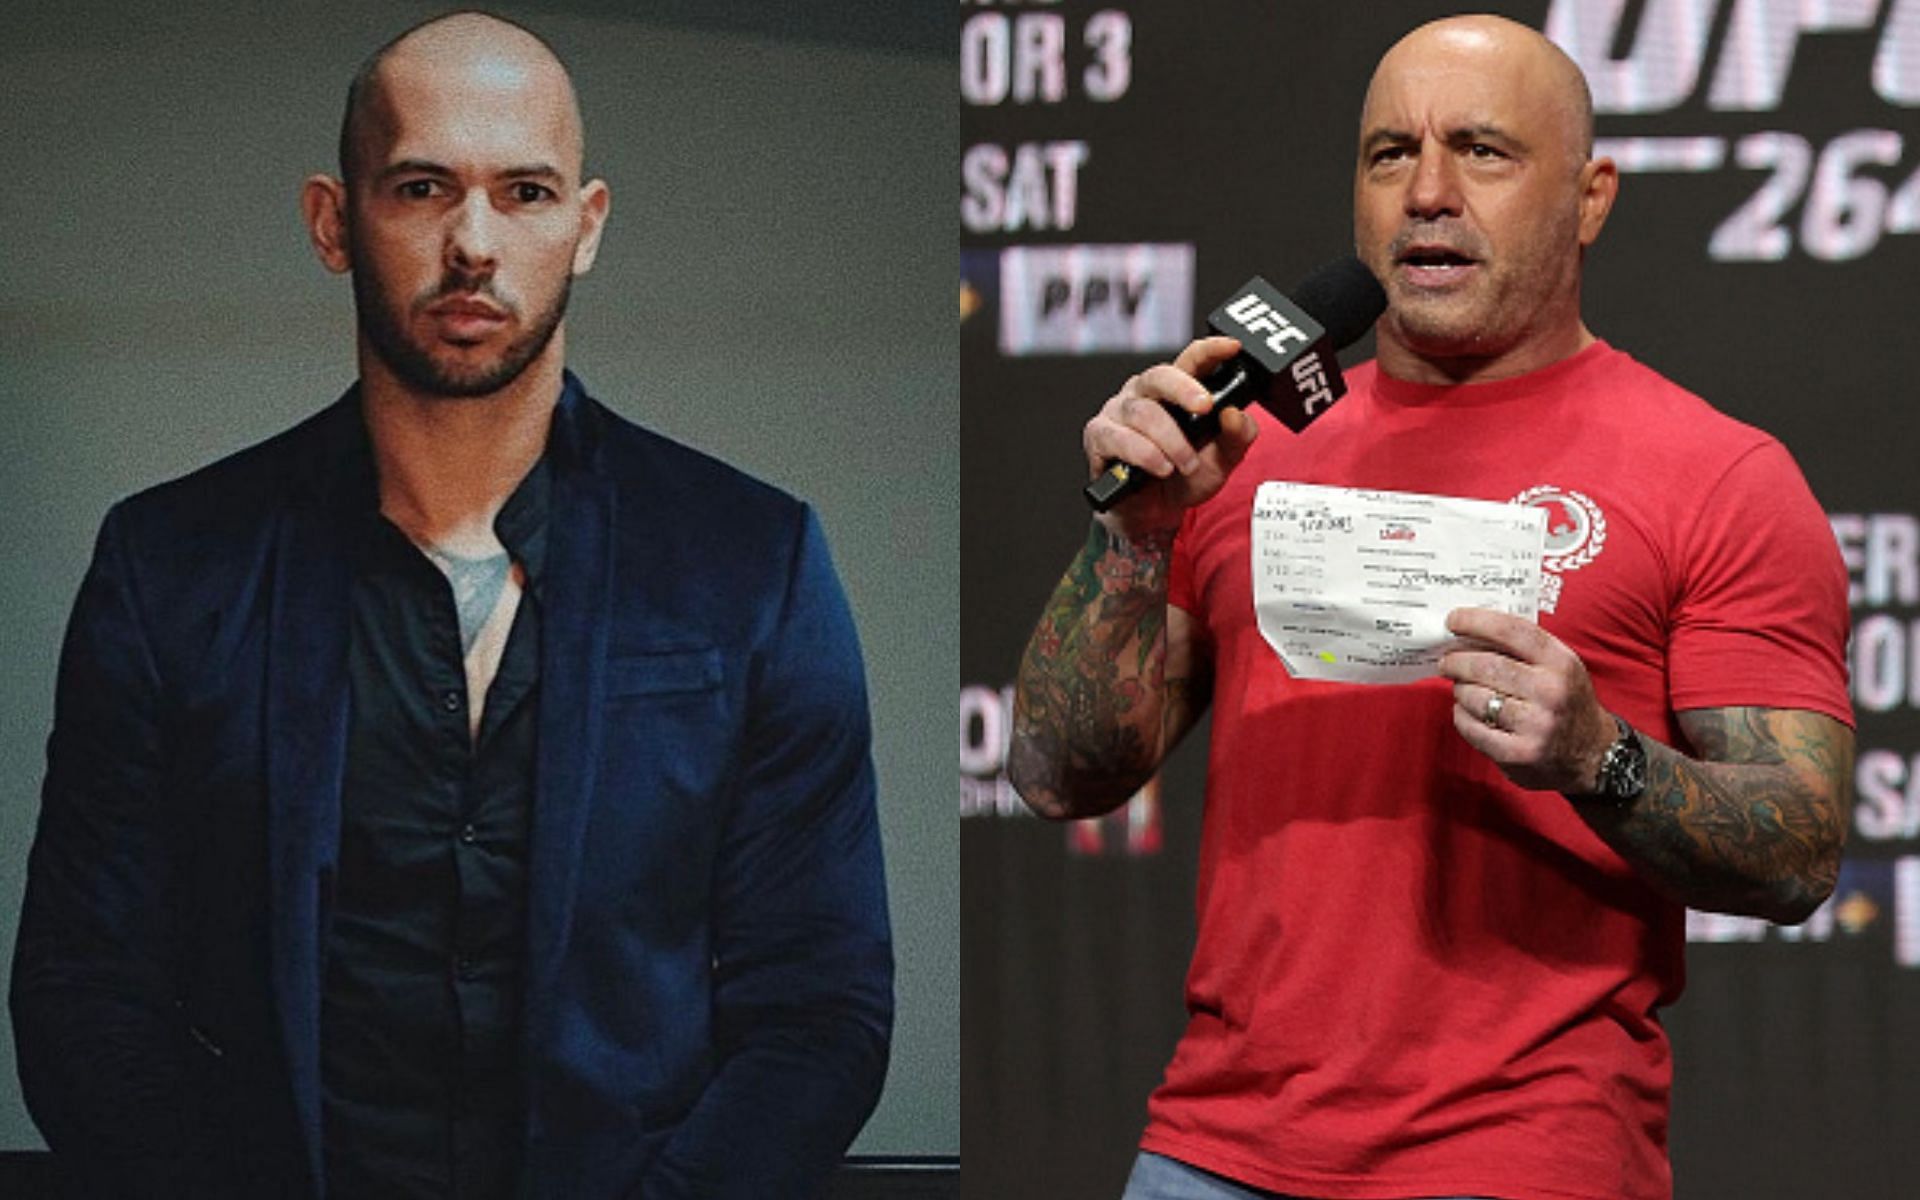 Andrew Tate (L) and Joe Rogan (R) [ Images via Getty Images and @CobraTate /Instagram ]